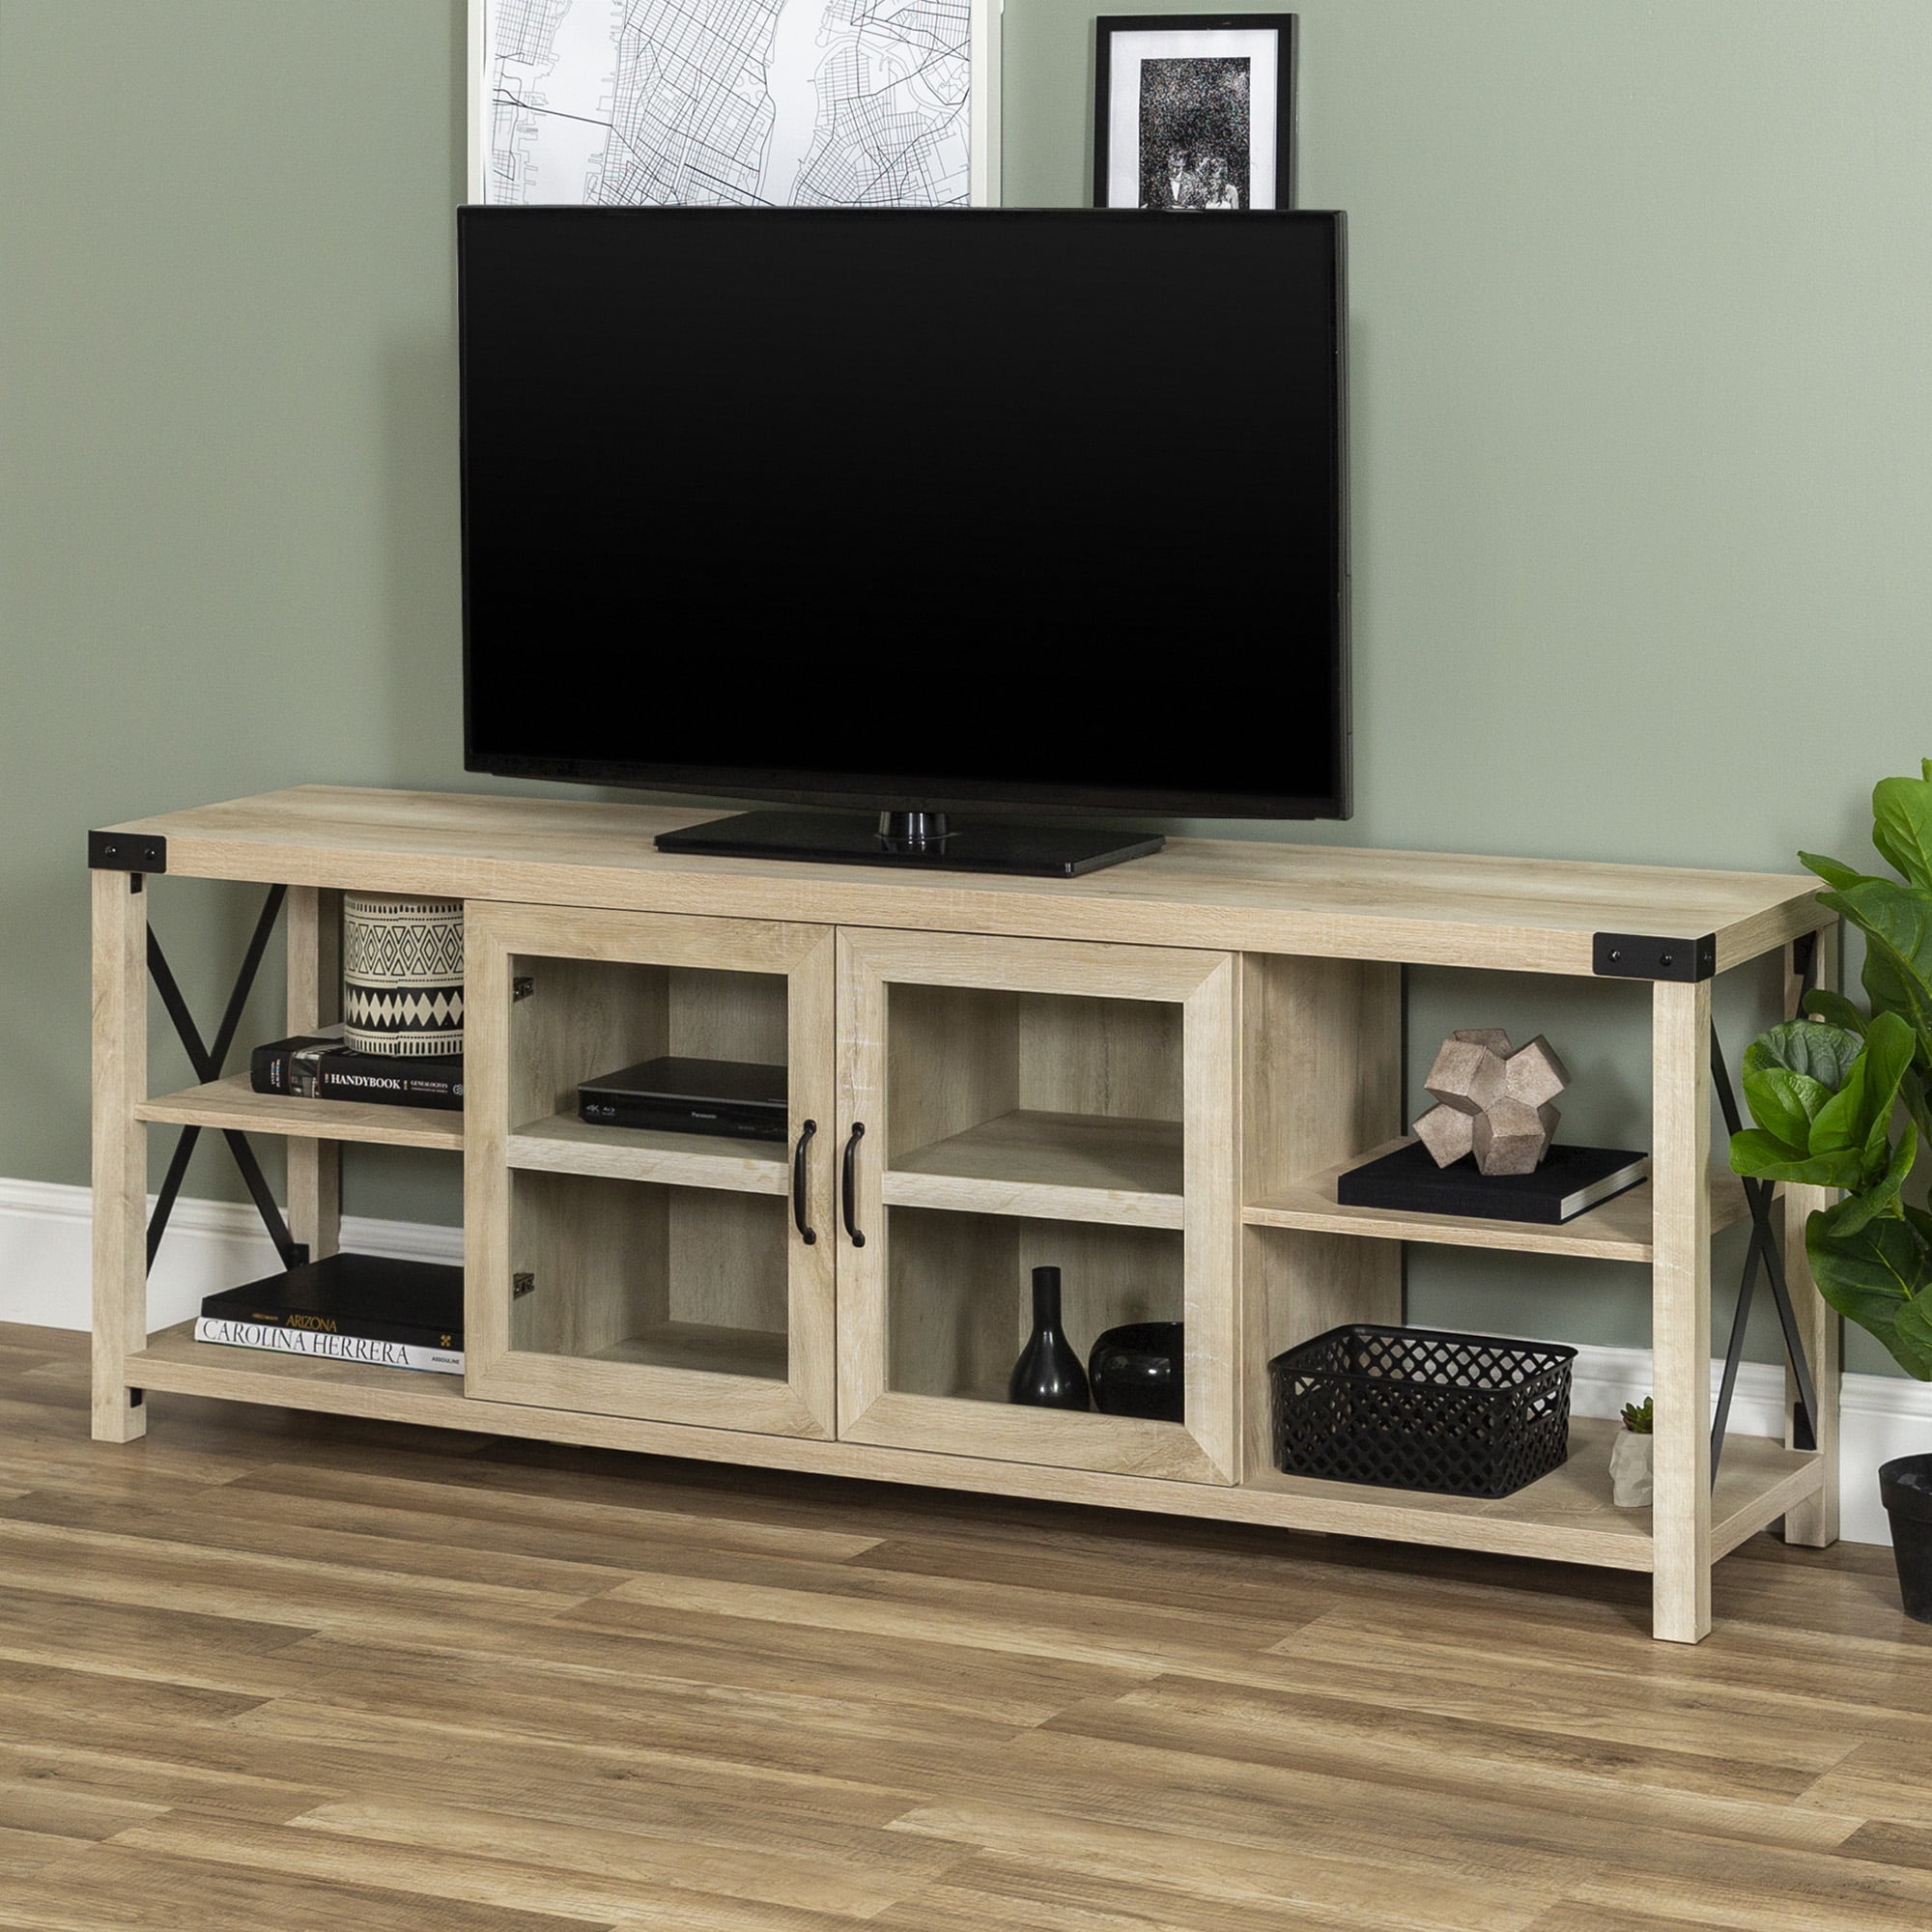 Woven Paths Farmhouse 2 Door Metal X Tv Stand For Tvs Up To 80